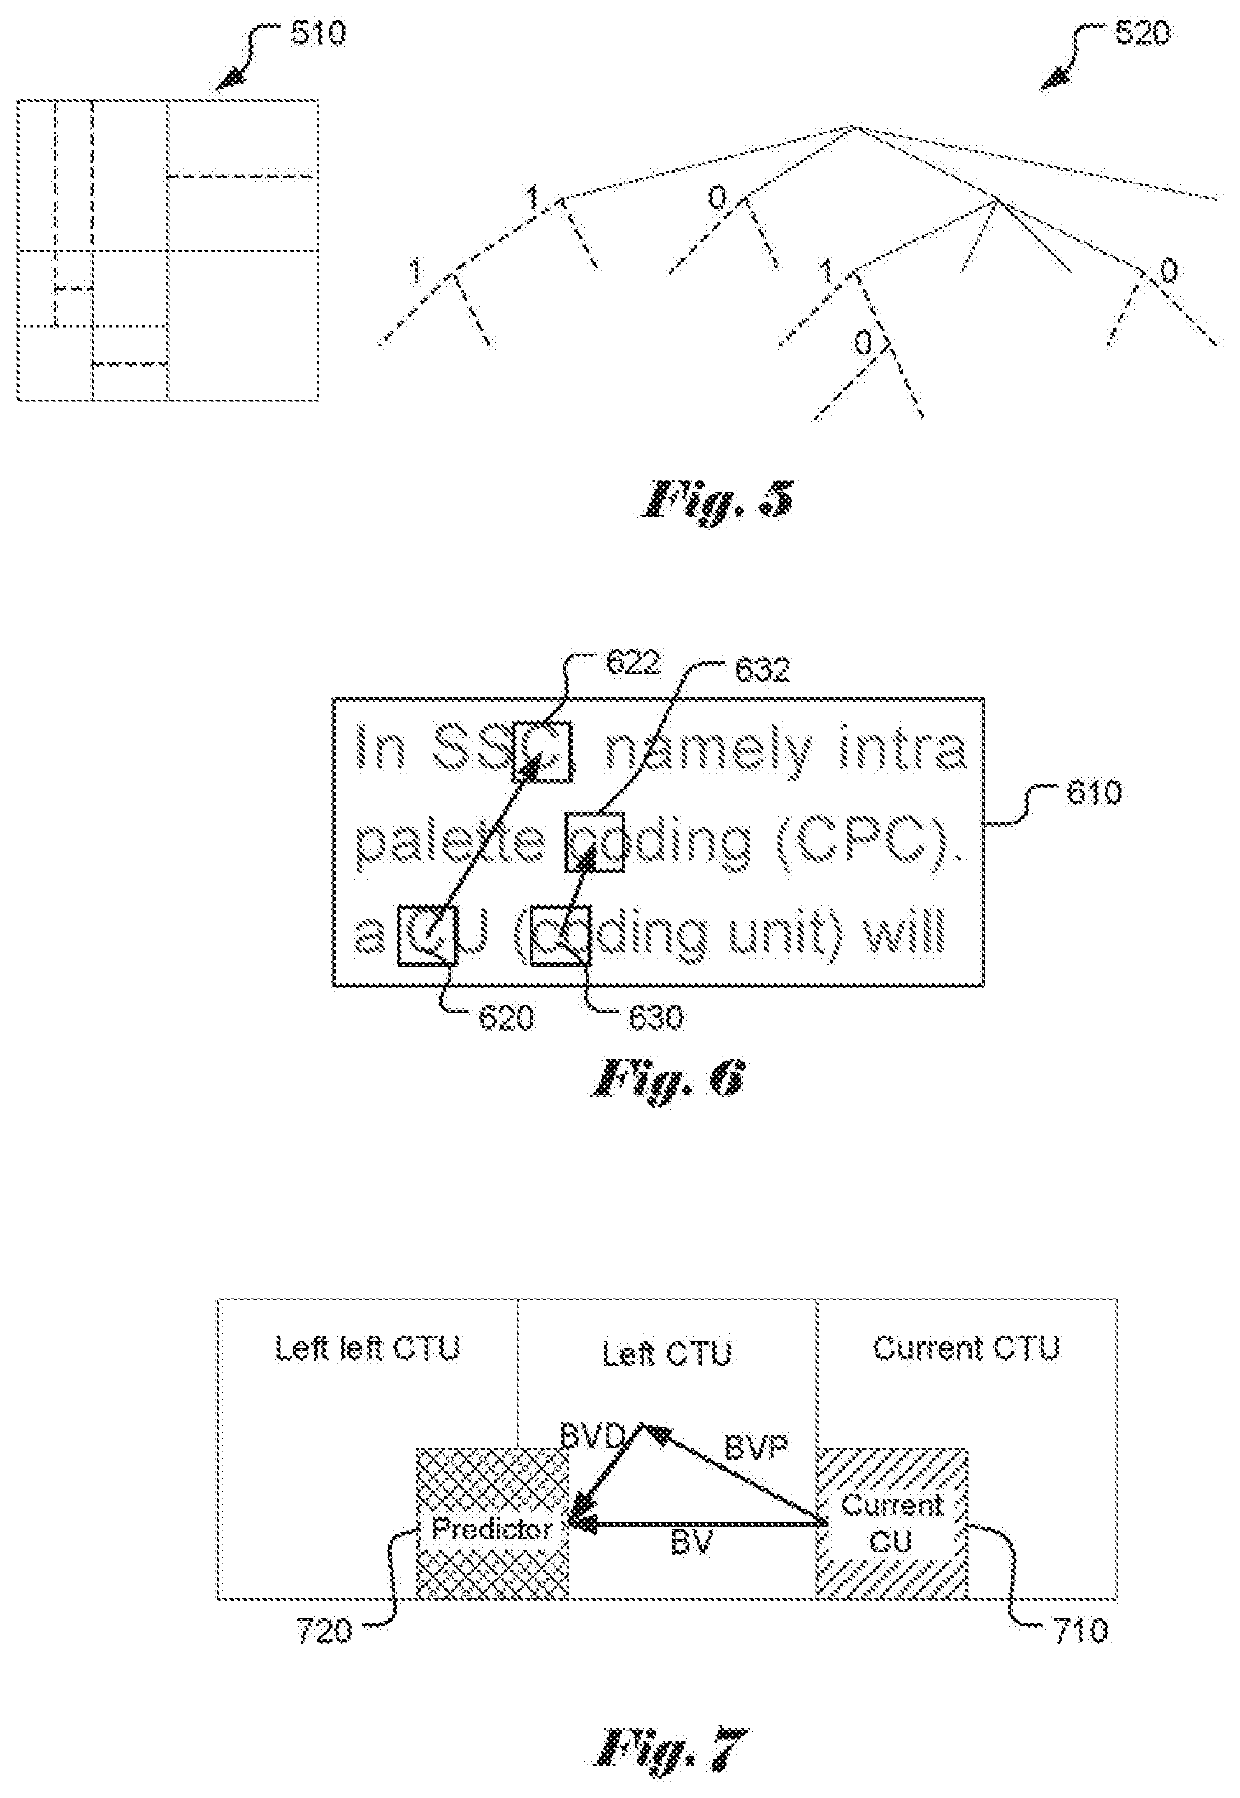 Method and apparatus of current picture referencing for video coding using affine motion compensation